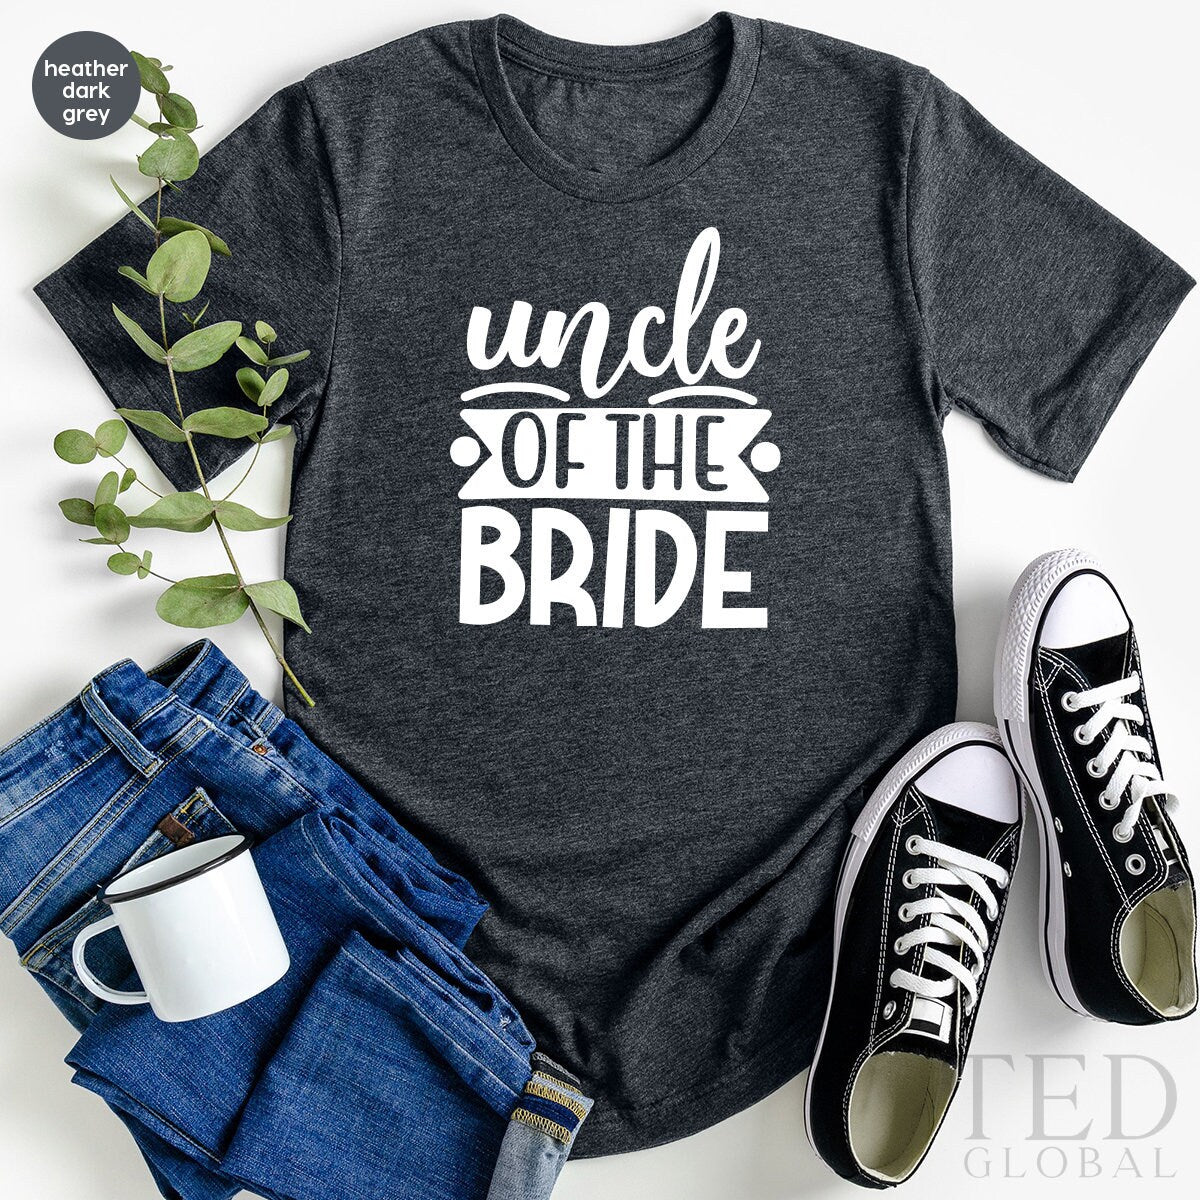 Uncle Of The Bride Shirt, Uncle Gift, Bride Family T-Shirt, Bride Team Shirt, Bachelorette T Shirt, Bachelor Shirt, Wedding Party TShirt - Fastdeliverytees.com